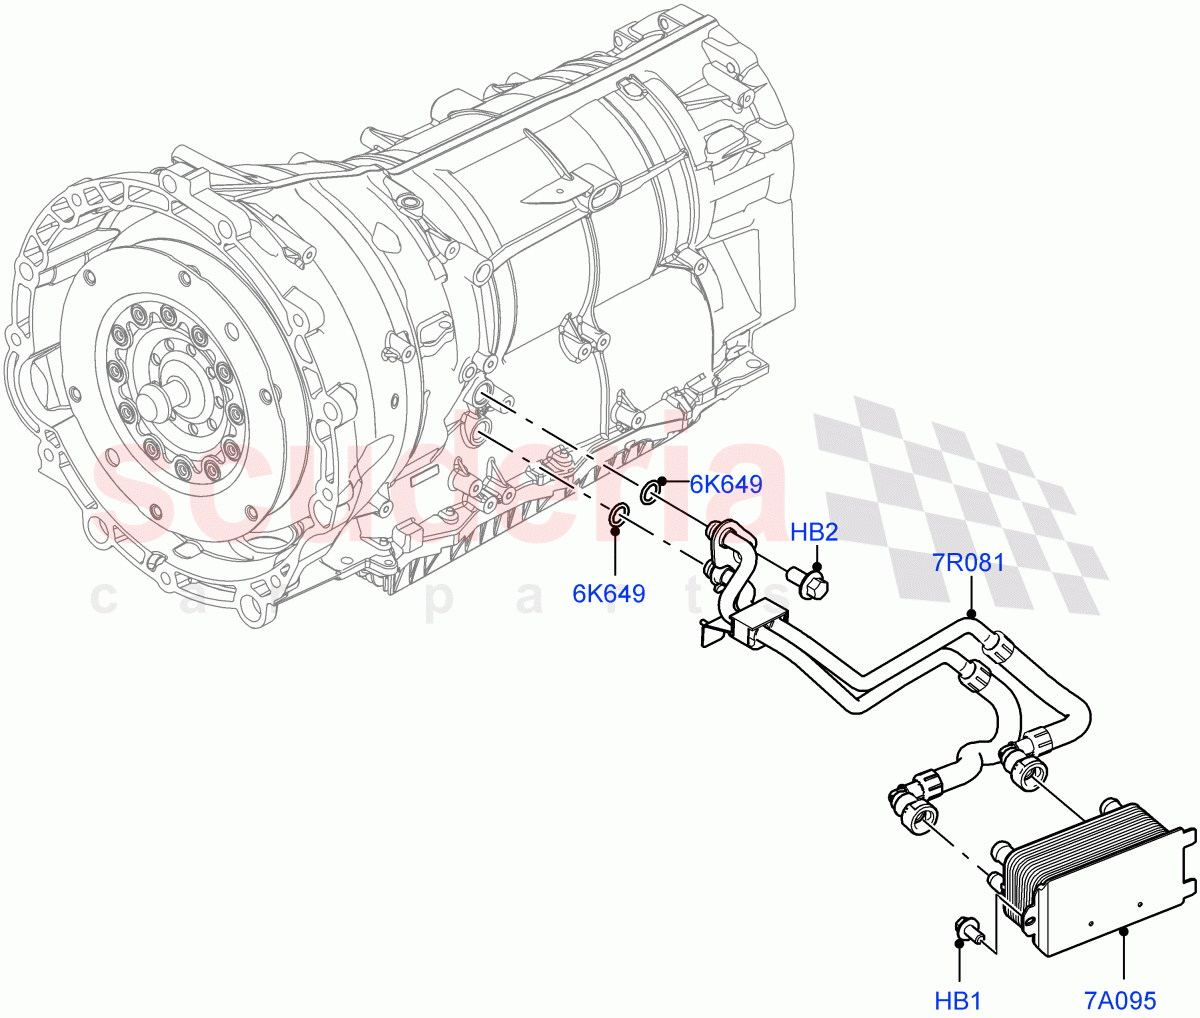 Transmission Cooling Systems(Nitra Plant Build)(3.0L AJ20P6 Petrol High,8 Speed Auto Trans ZF 8HP76,3.0L AJ20D6 Diesel High) of Land Rover Land Rover Defender (2020+) [5.0 OHC SGDI SC V8 Petrol]